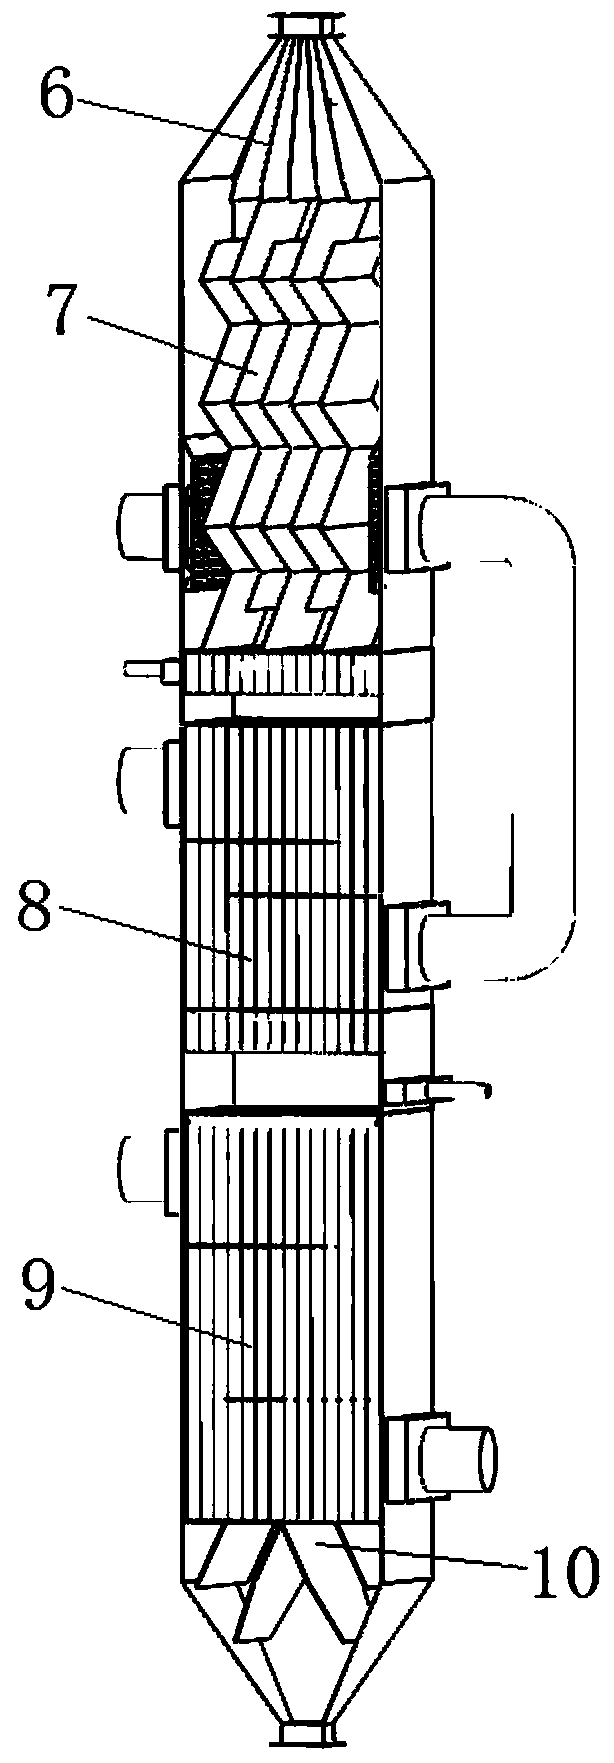 Carbon-based catalyst regeneration device and process